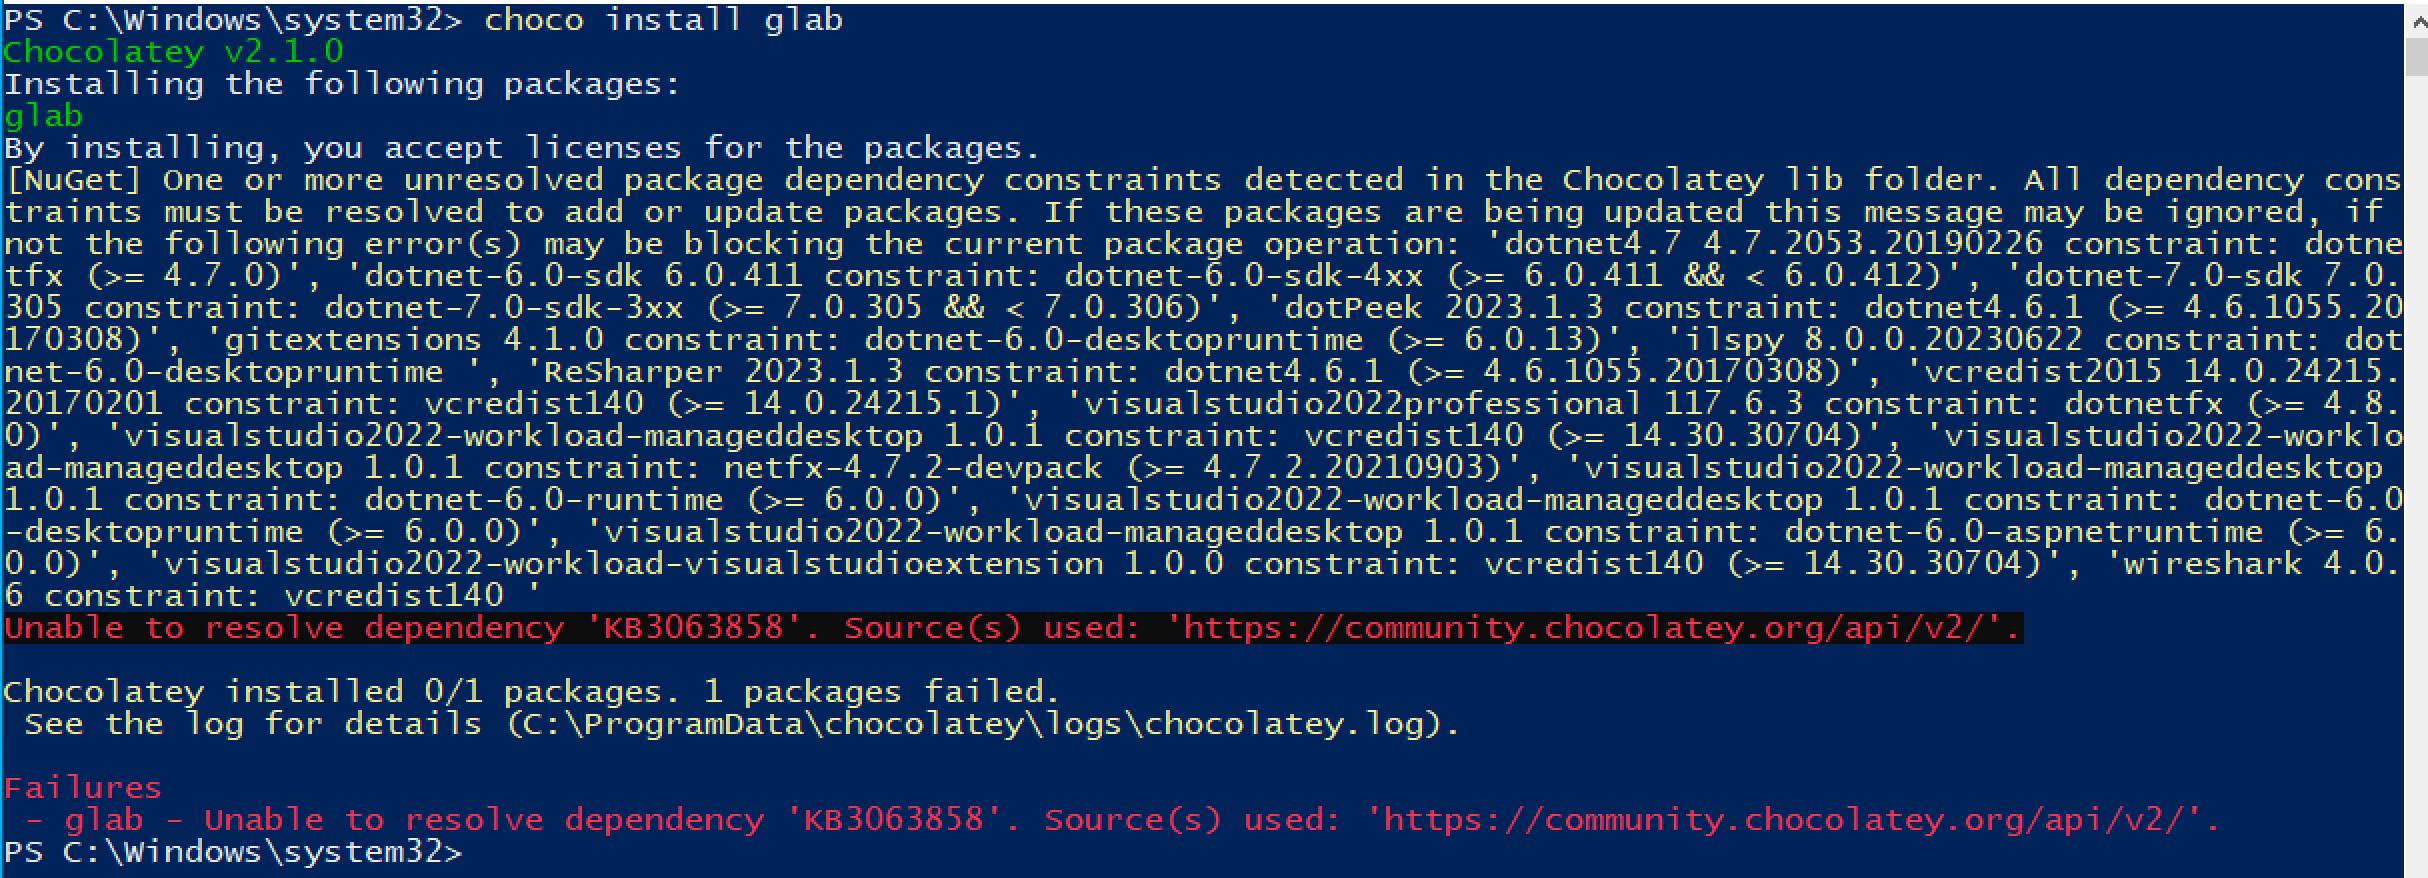 Output from choco install glab where it fails to resolve dependency 'KB306858'